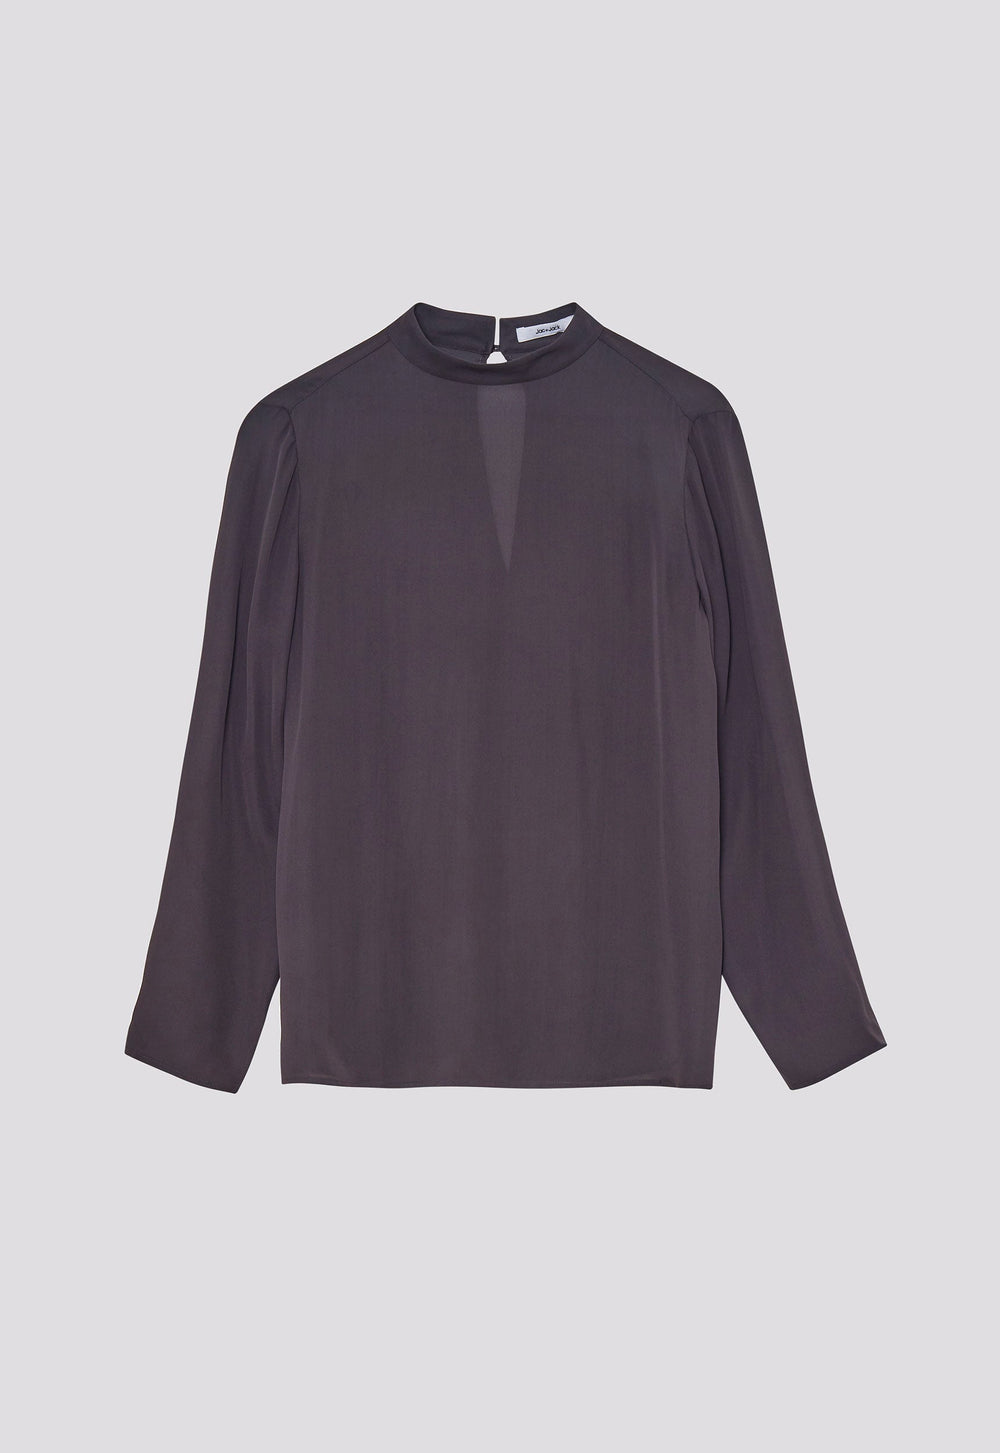 Jac+Jack Clunes Silk Top - Muse Charcoal